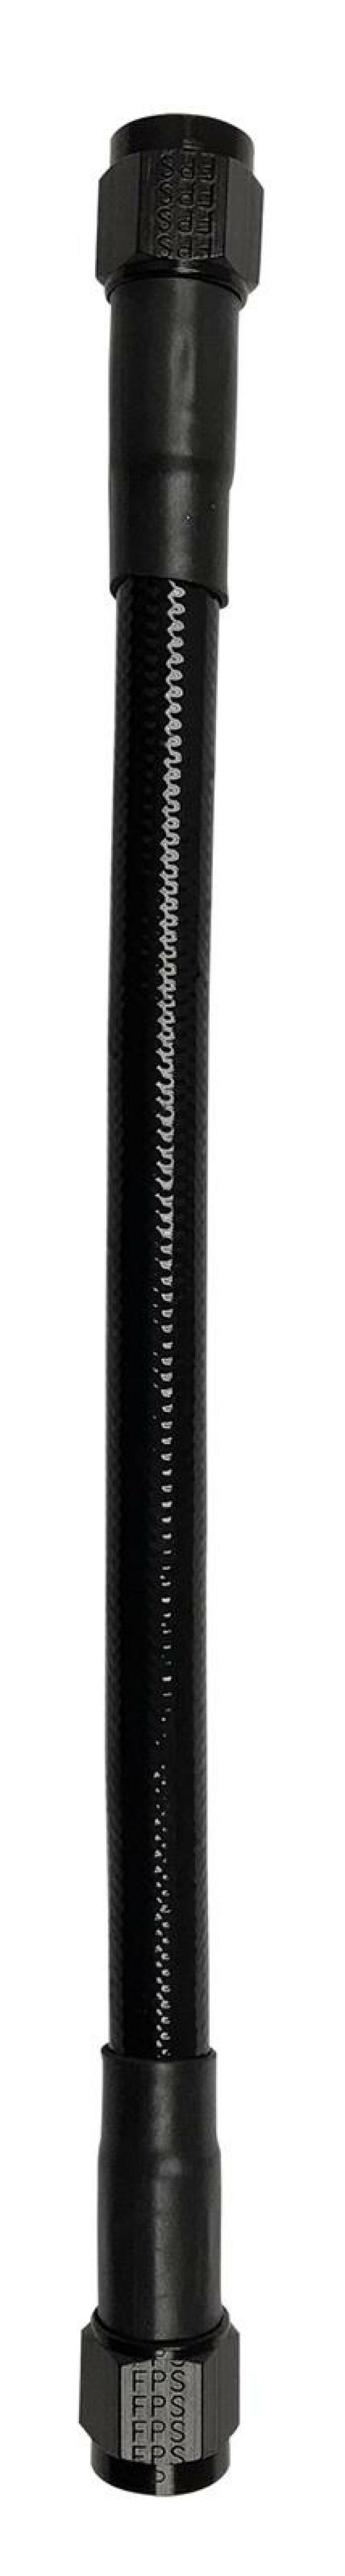 Fragola -8AN Ext Black PTFE Hose Assembly Straight x Straight 48in - 6028-1-1-48BL